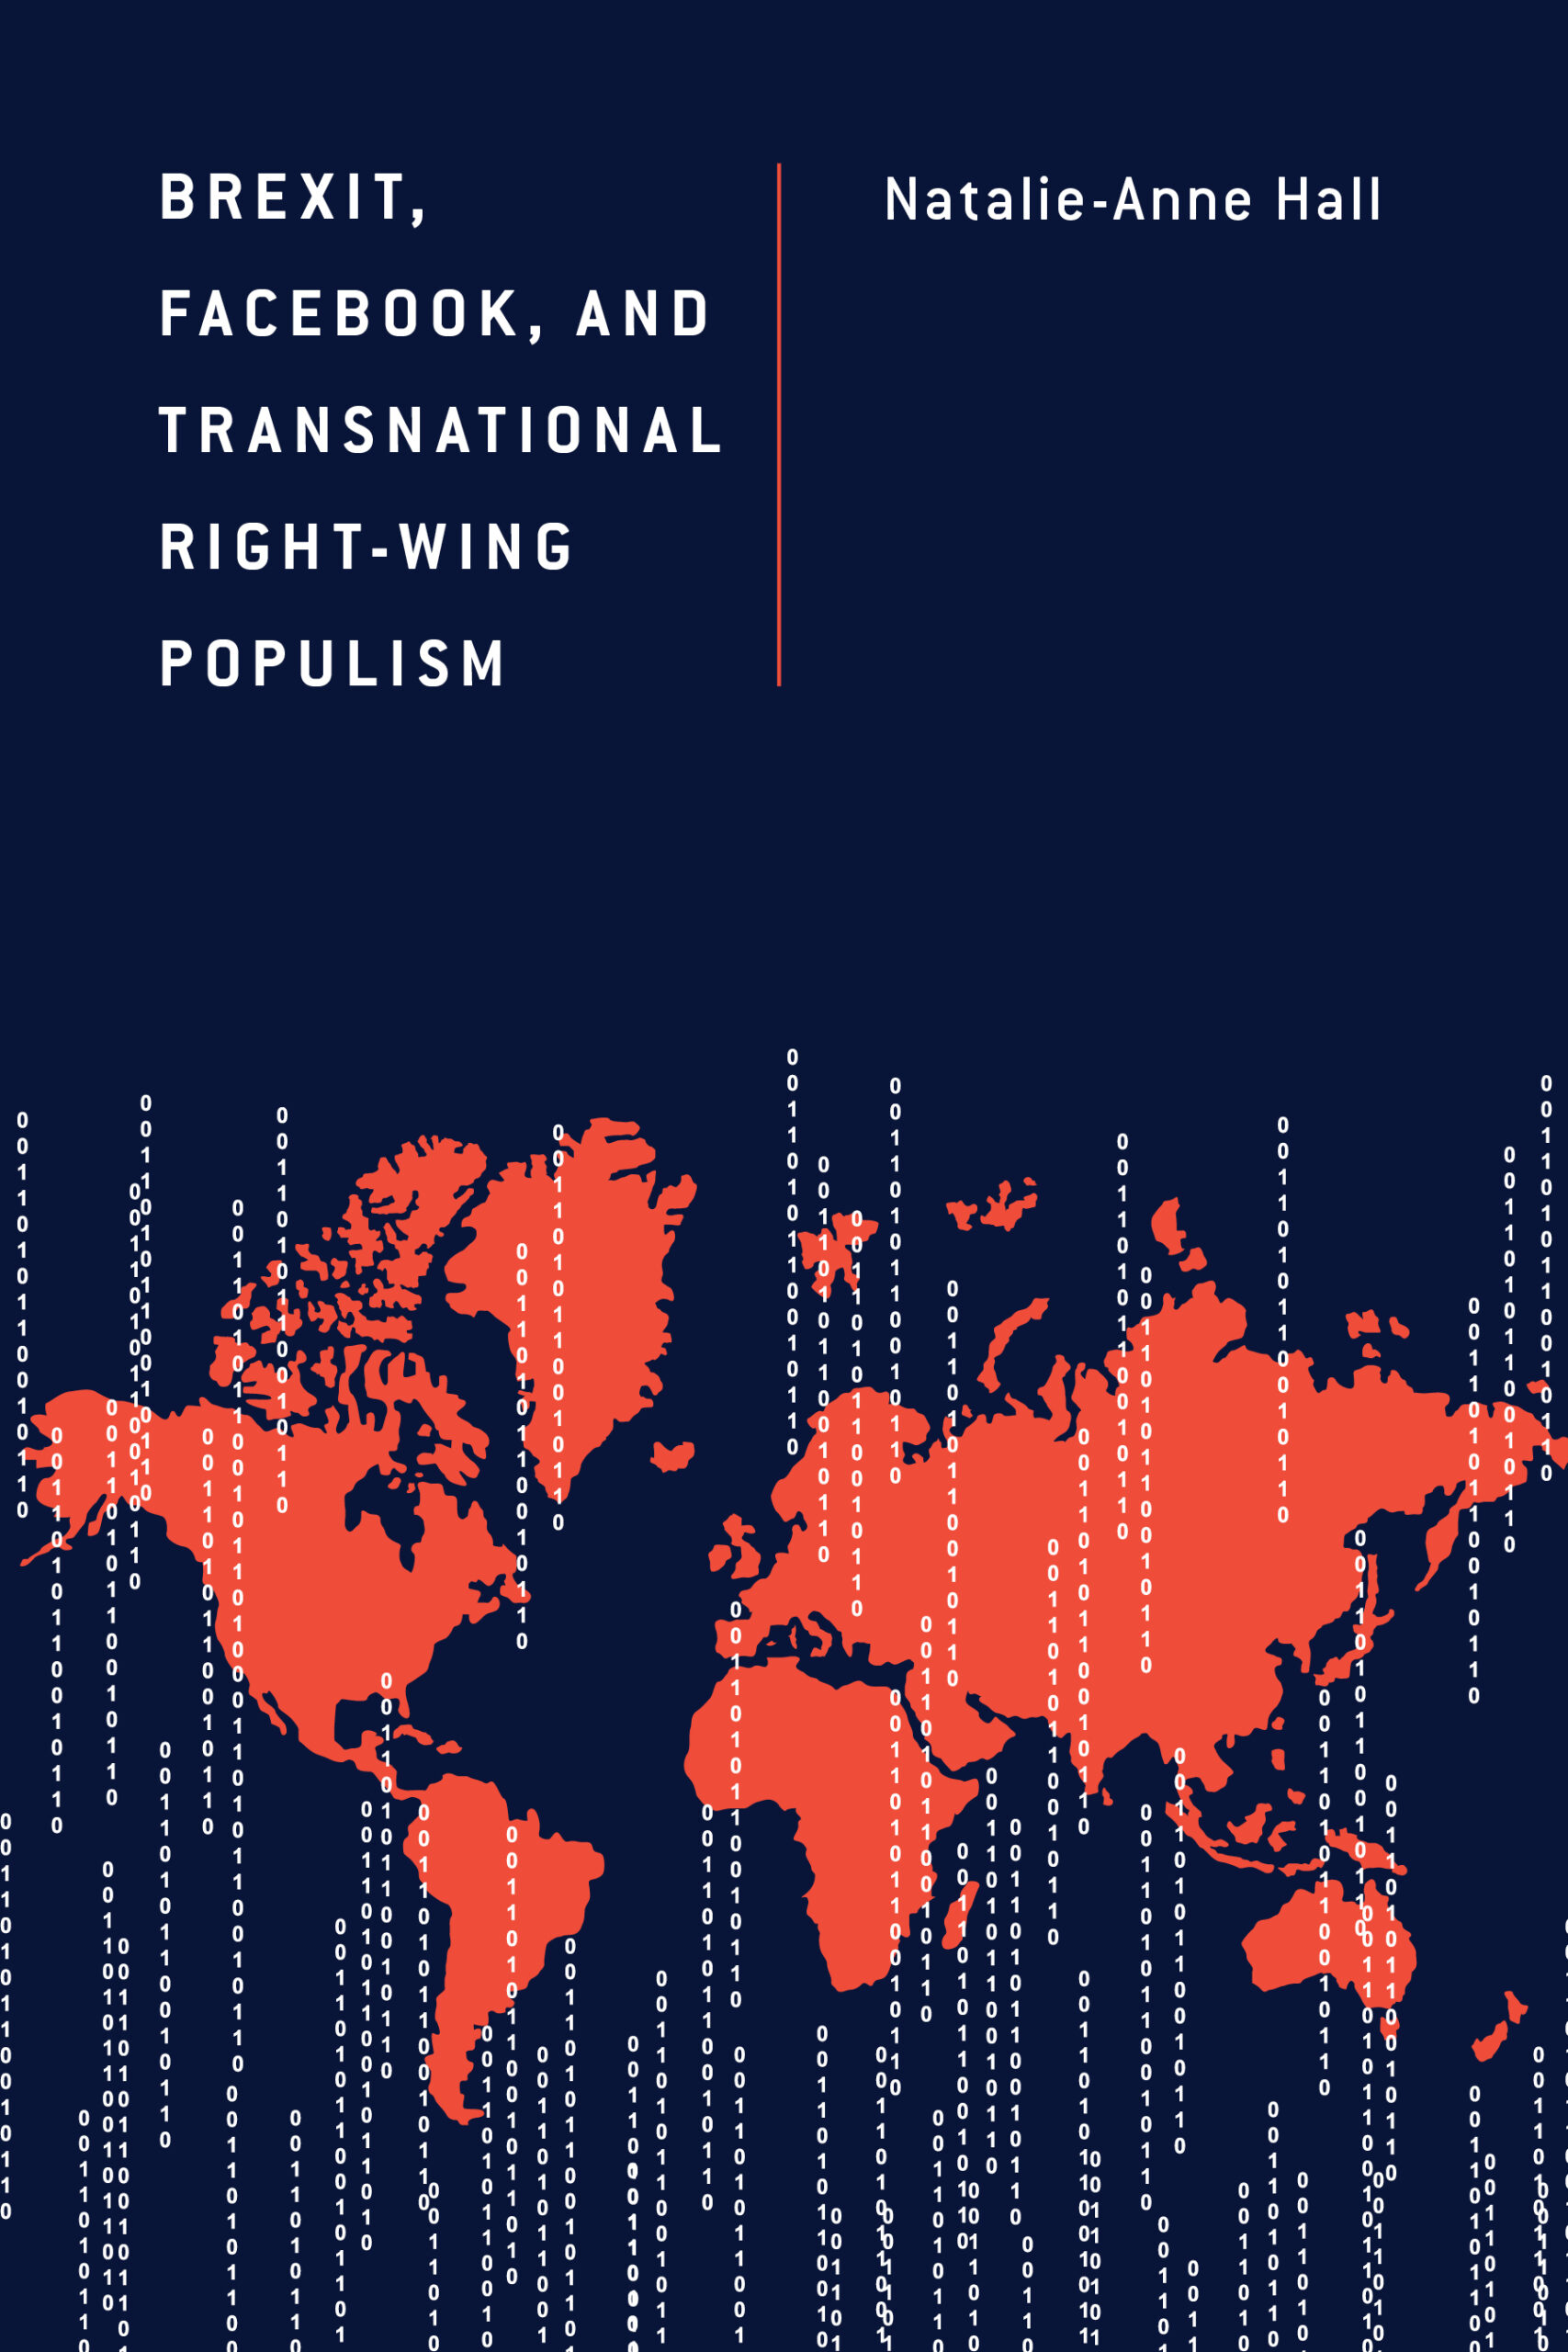 CRCC Member Natalie-Anne Hall publishes book on Brexit, Facebook, and Transnational Right-Wing Populism